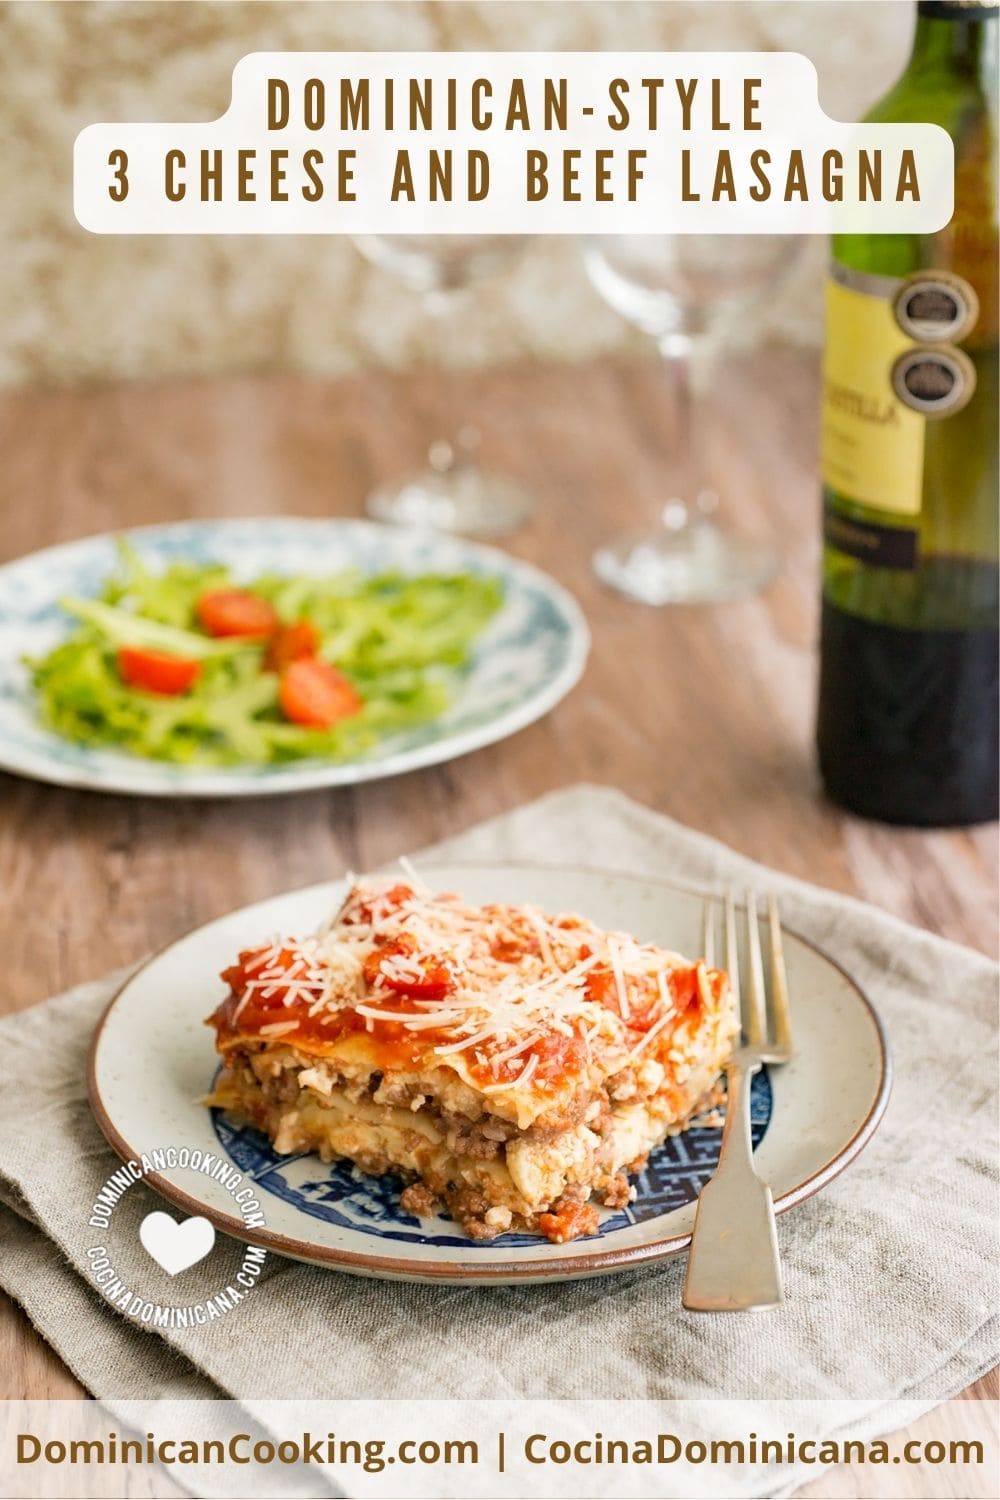 Dominican-style 3 cheese and beef lasagna recipe.